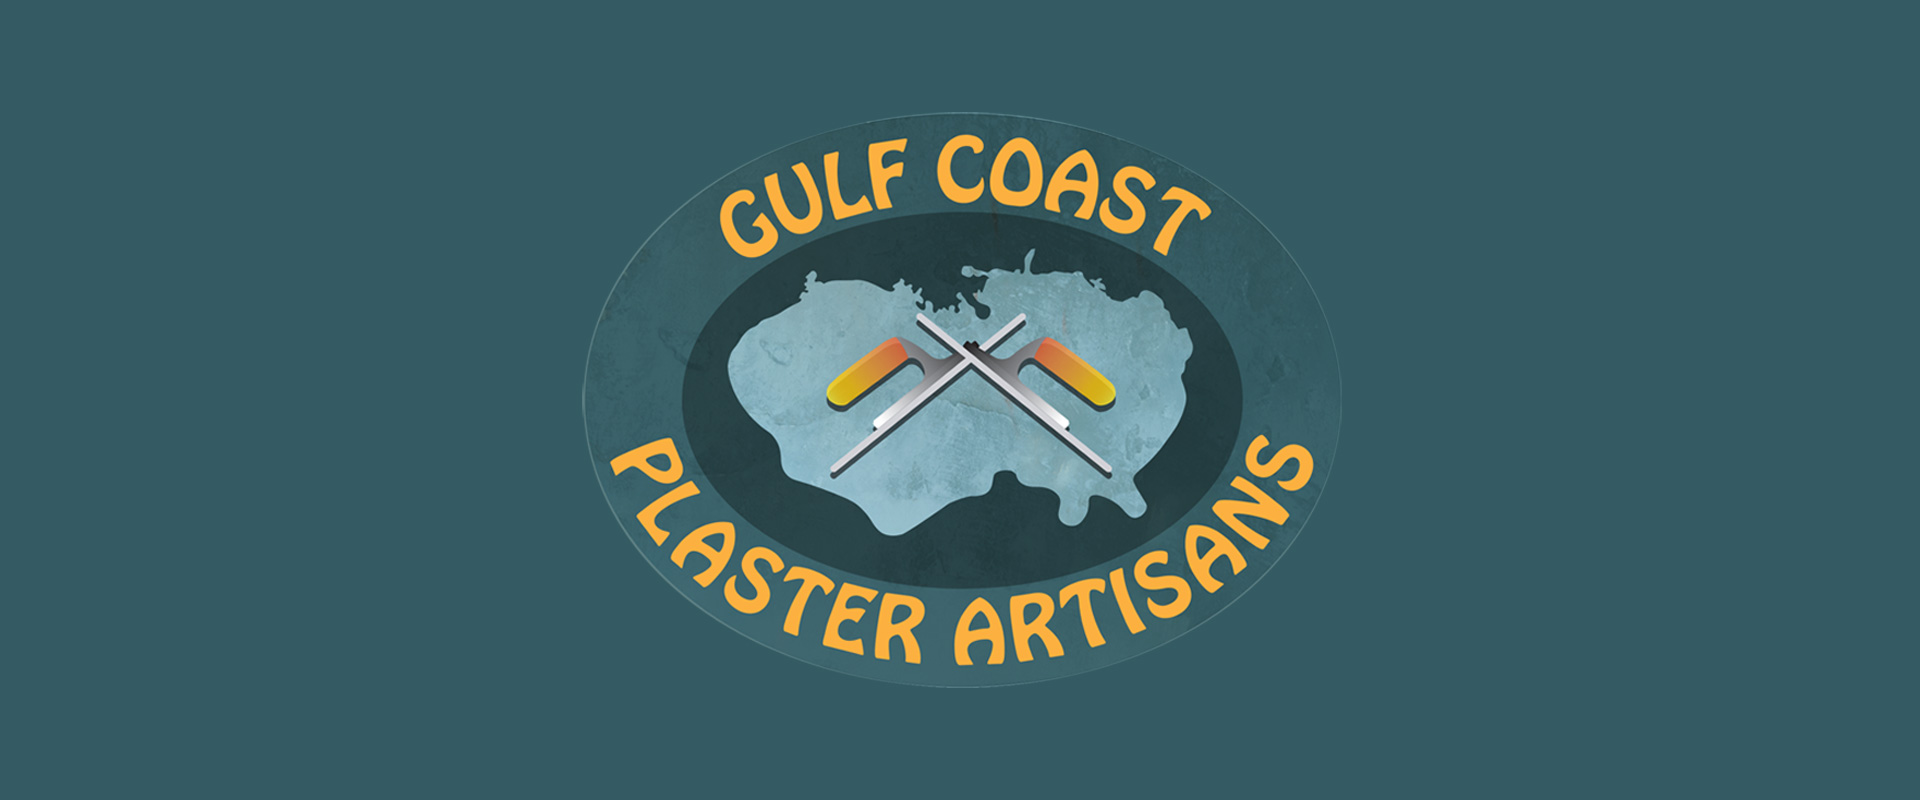 Gulf Coast Plaster Artisans powered by Sylvia T Designs. Exclusive distributors of Stucco Italiano plaster and Topcret Microcement.